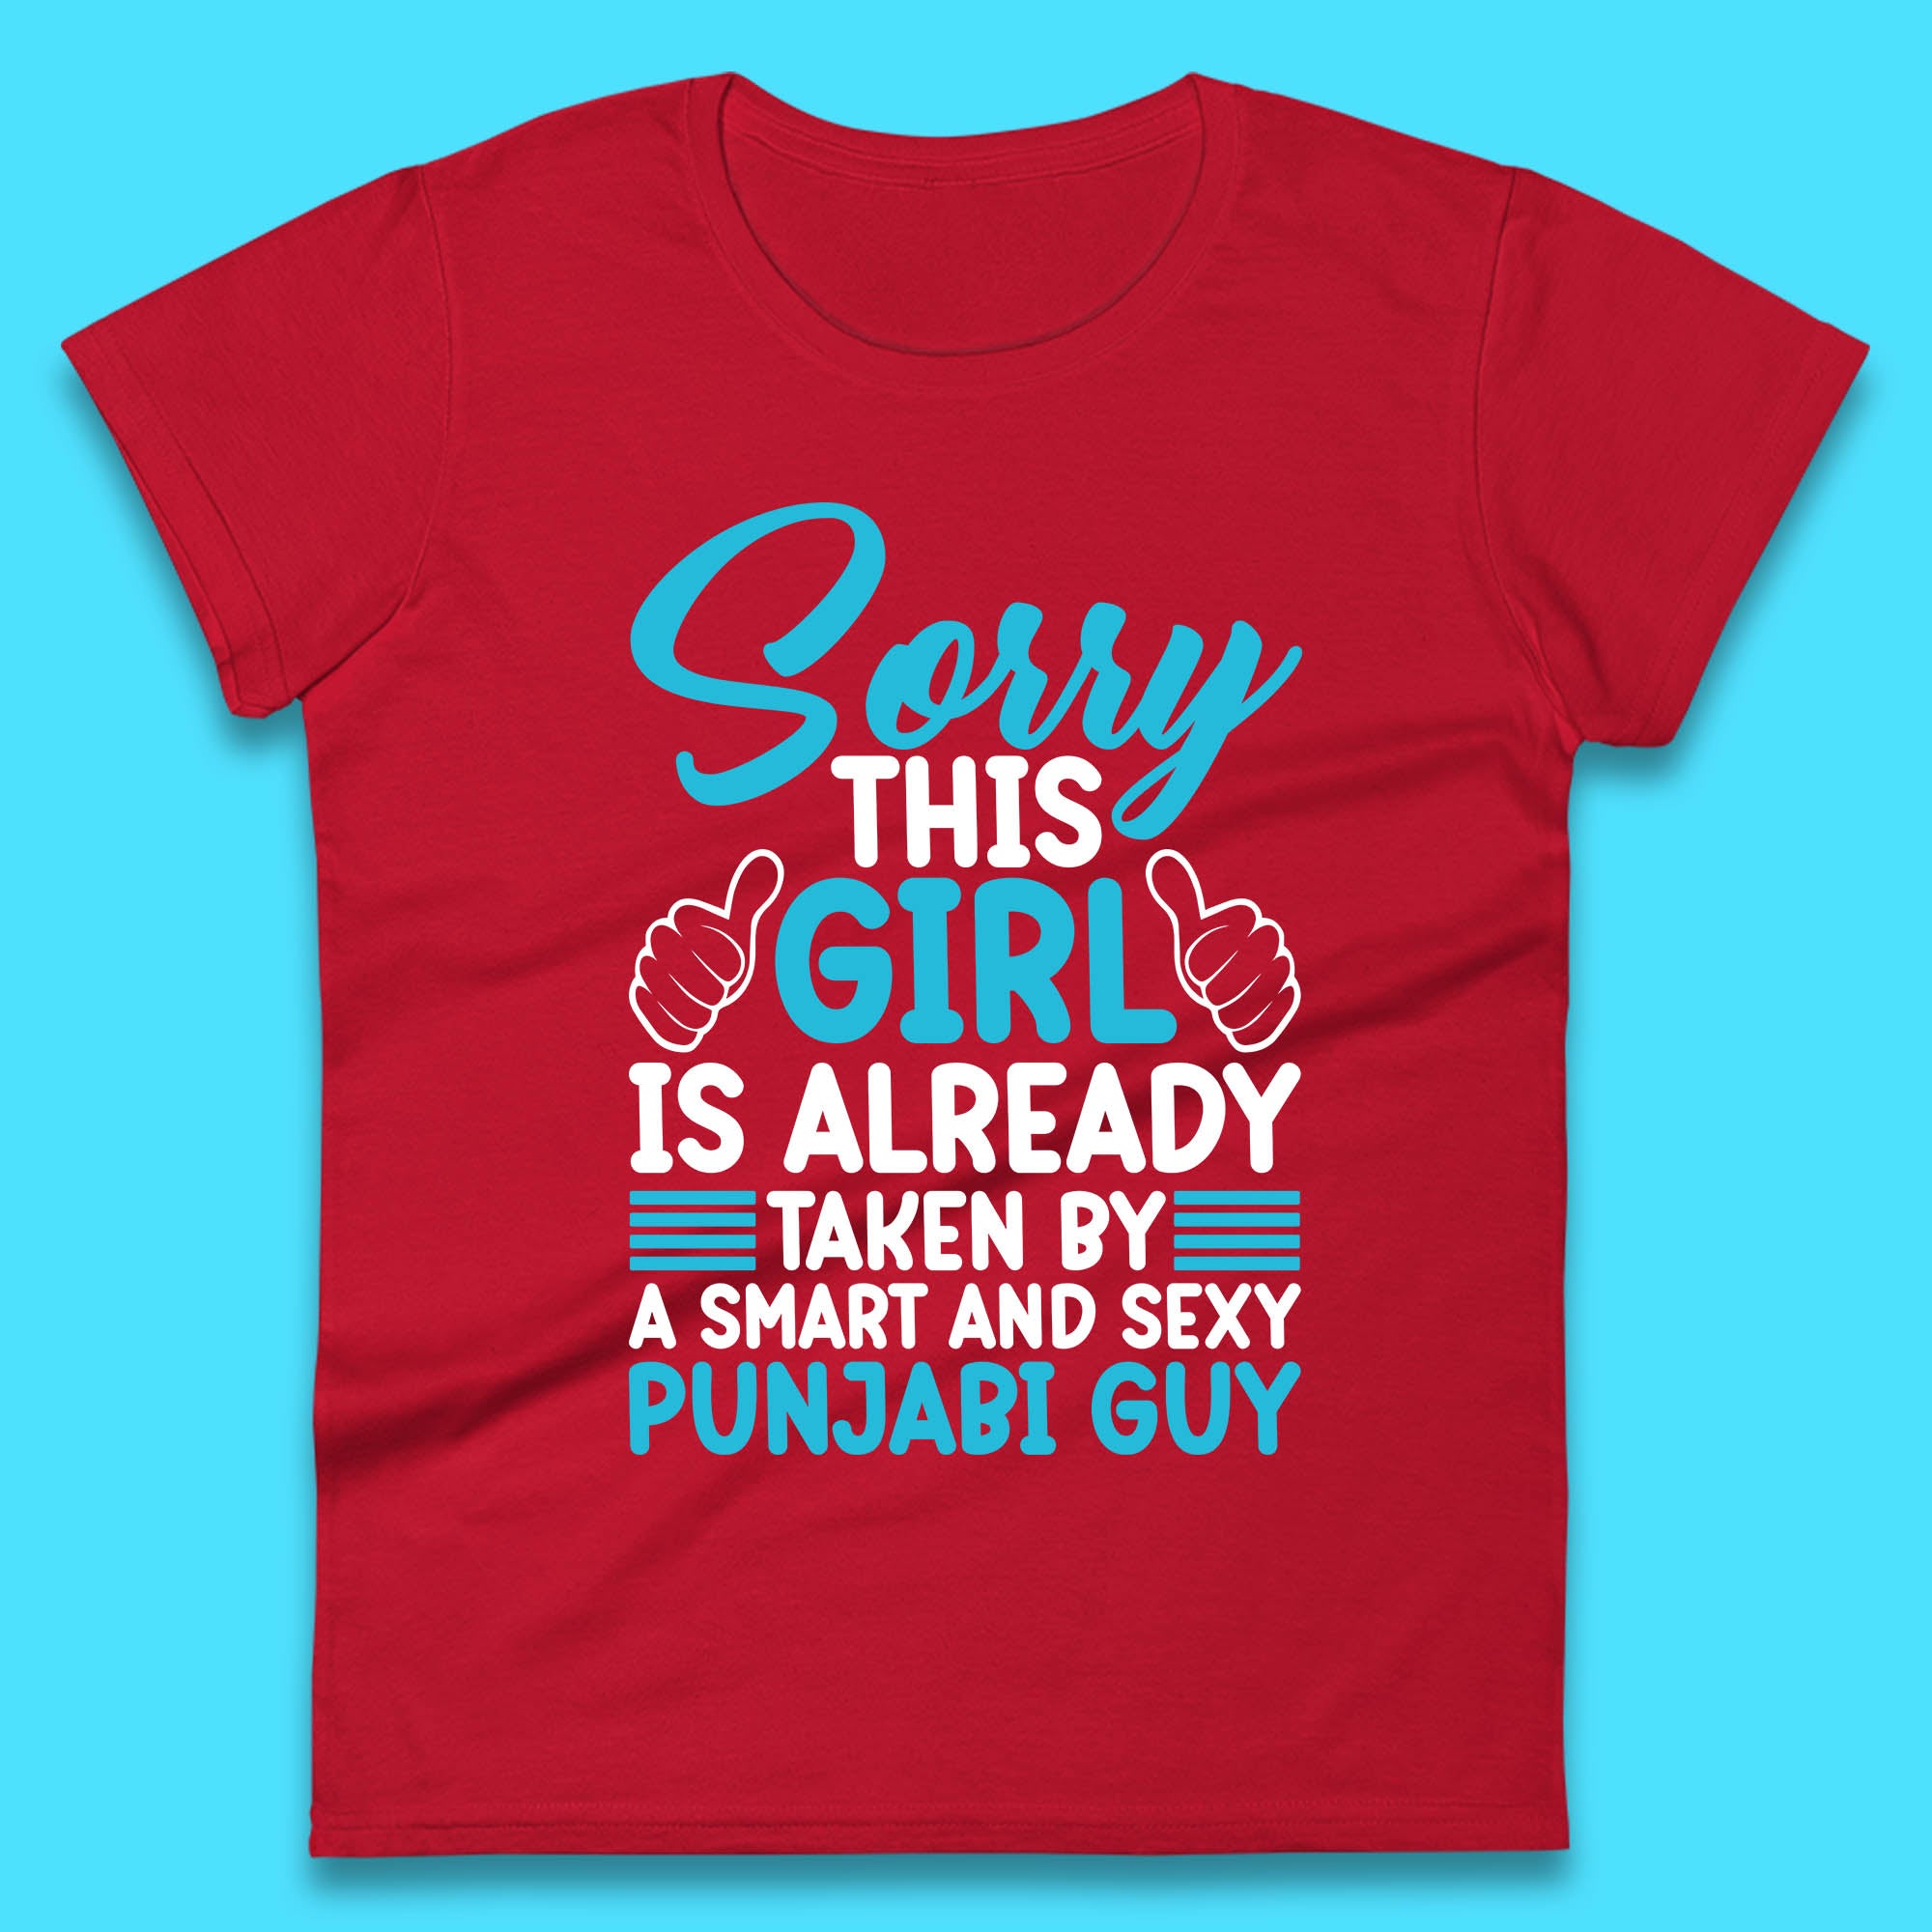 Sorry This Girl Is Already Taken By A Smart And Sexy Punjabi Guy Womens Tee Top